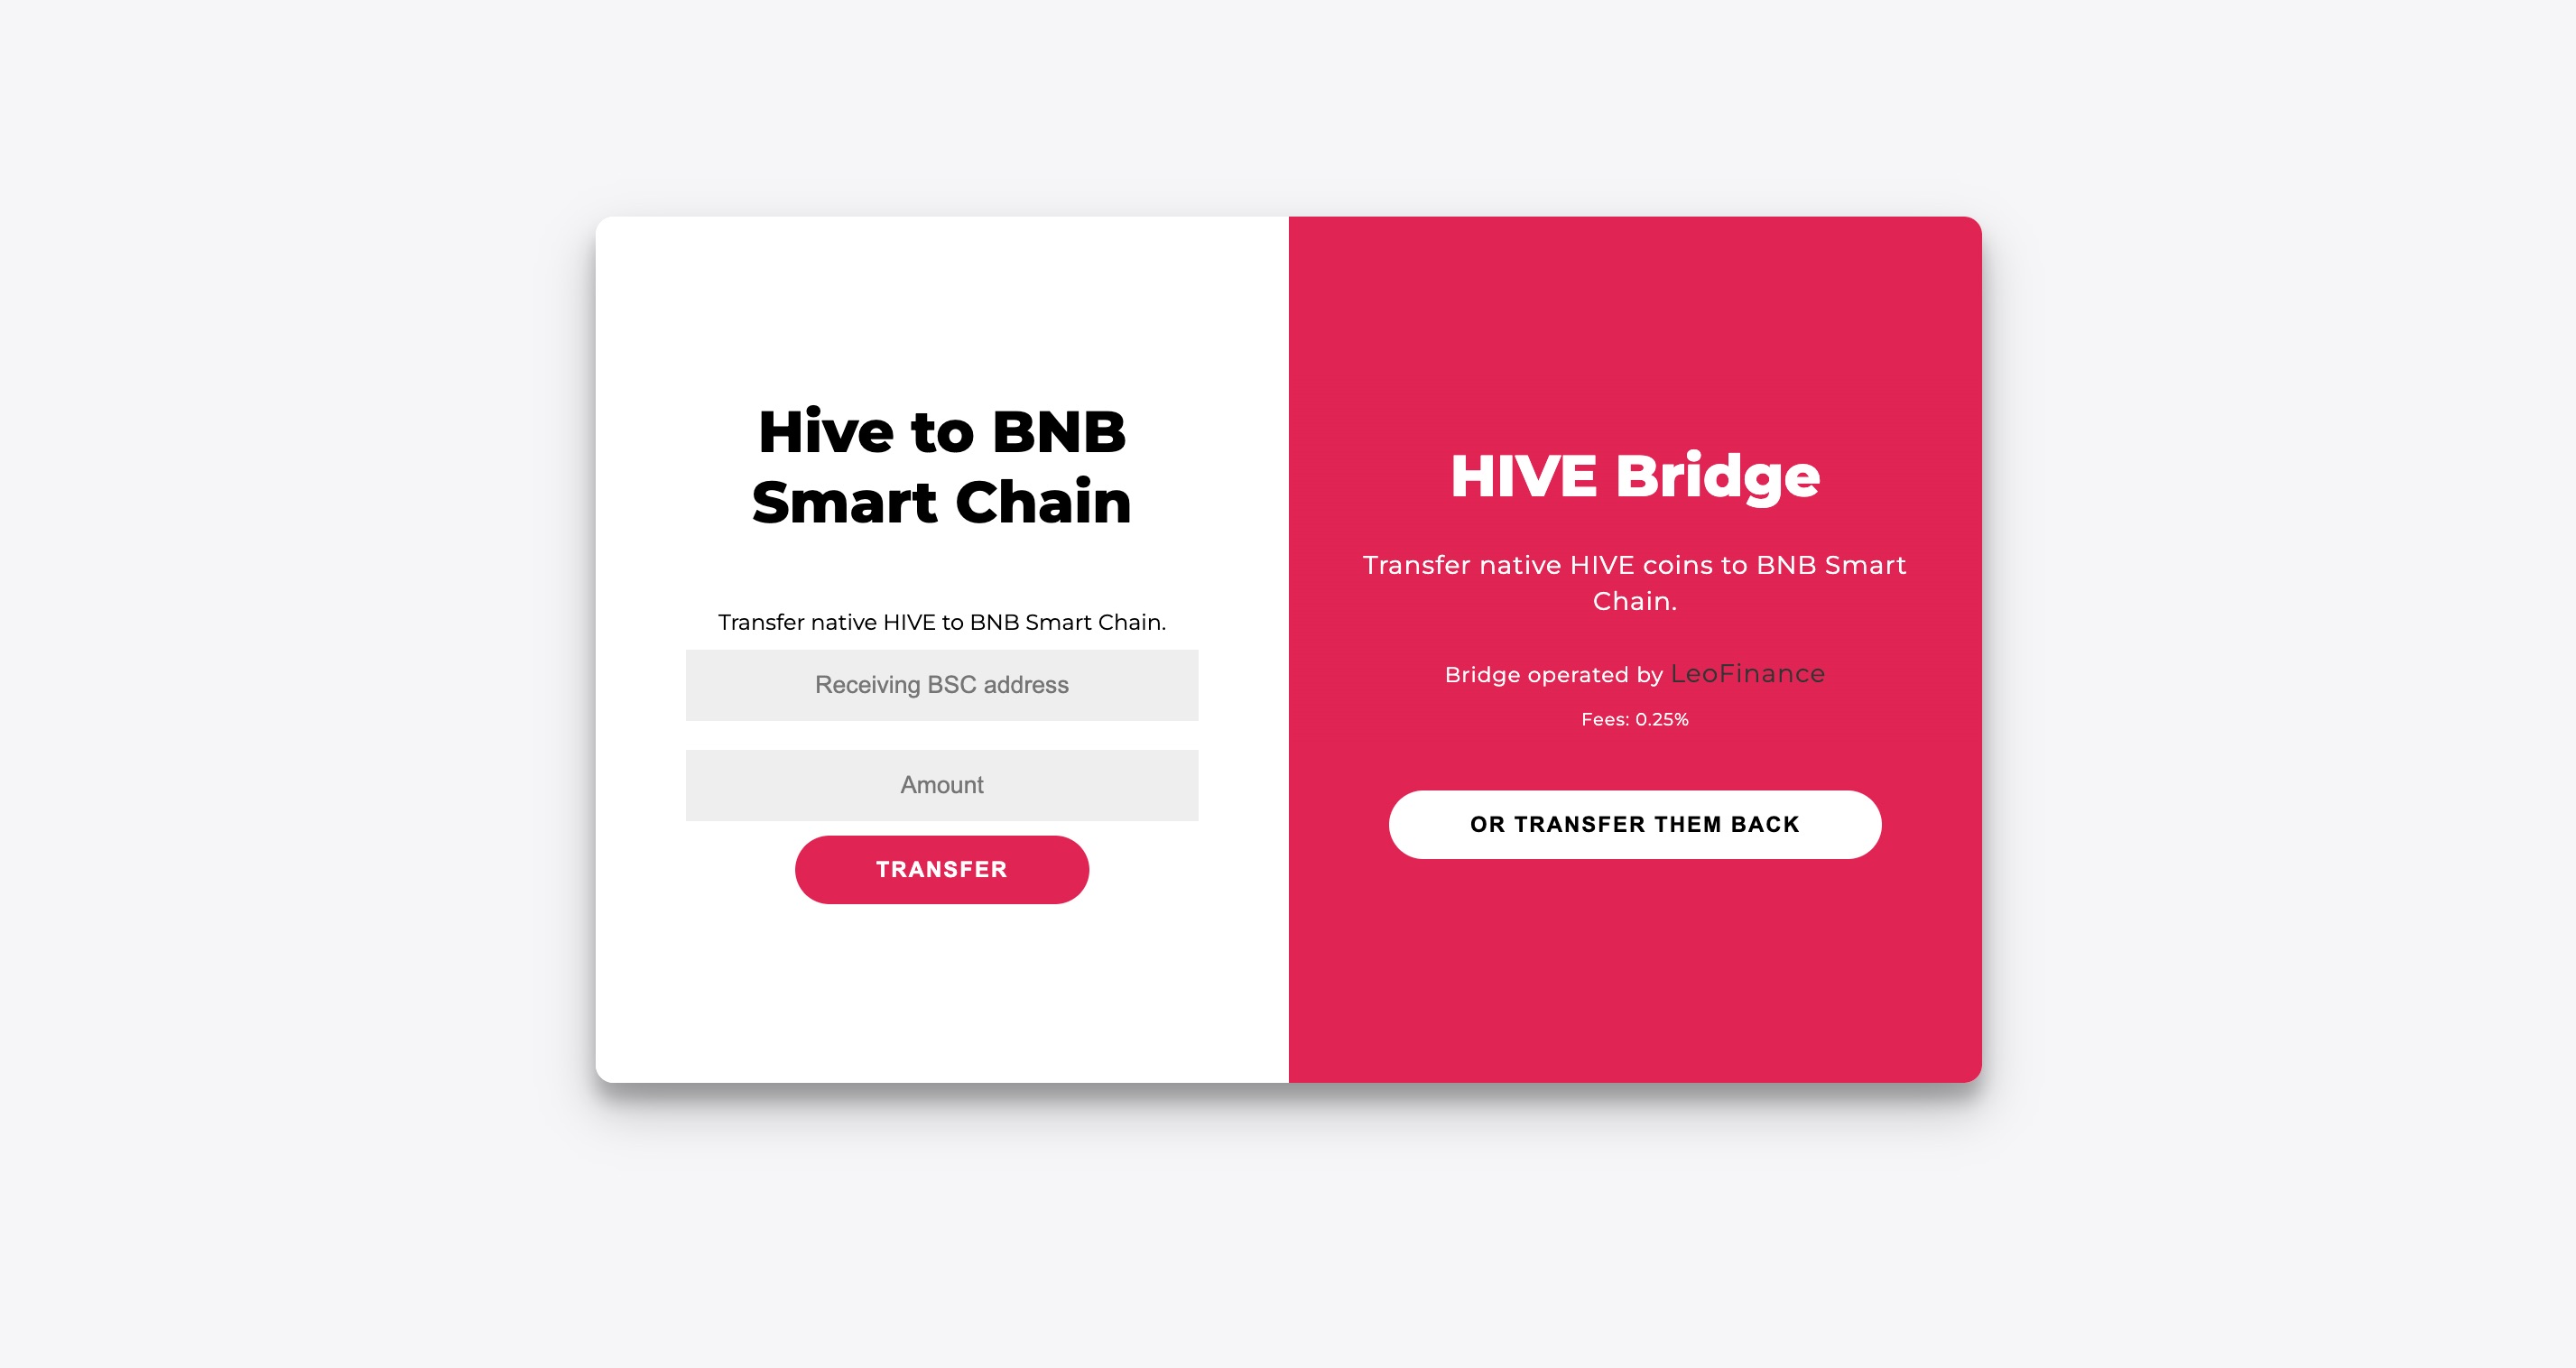 After buying Hive without KYC on ParaSwap, bridge them back to Hive.